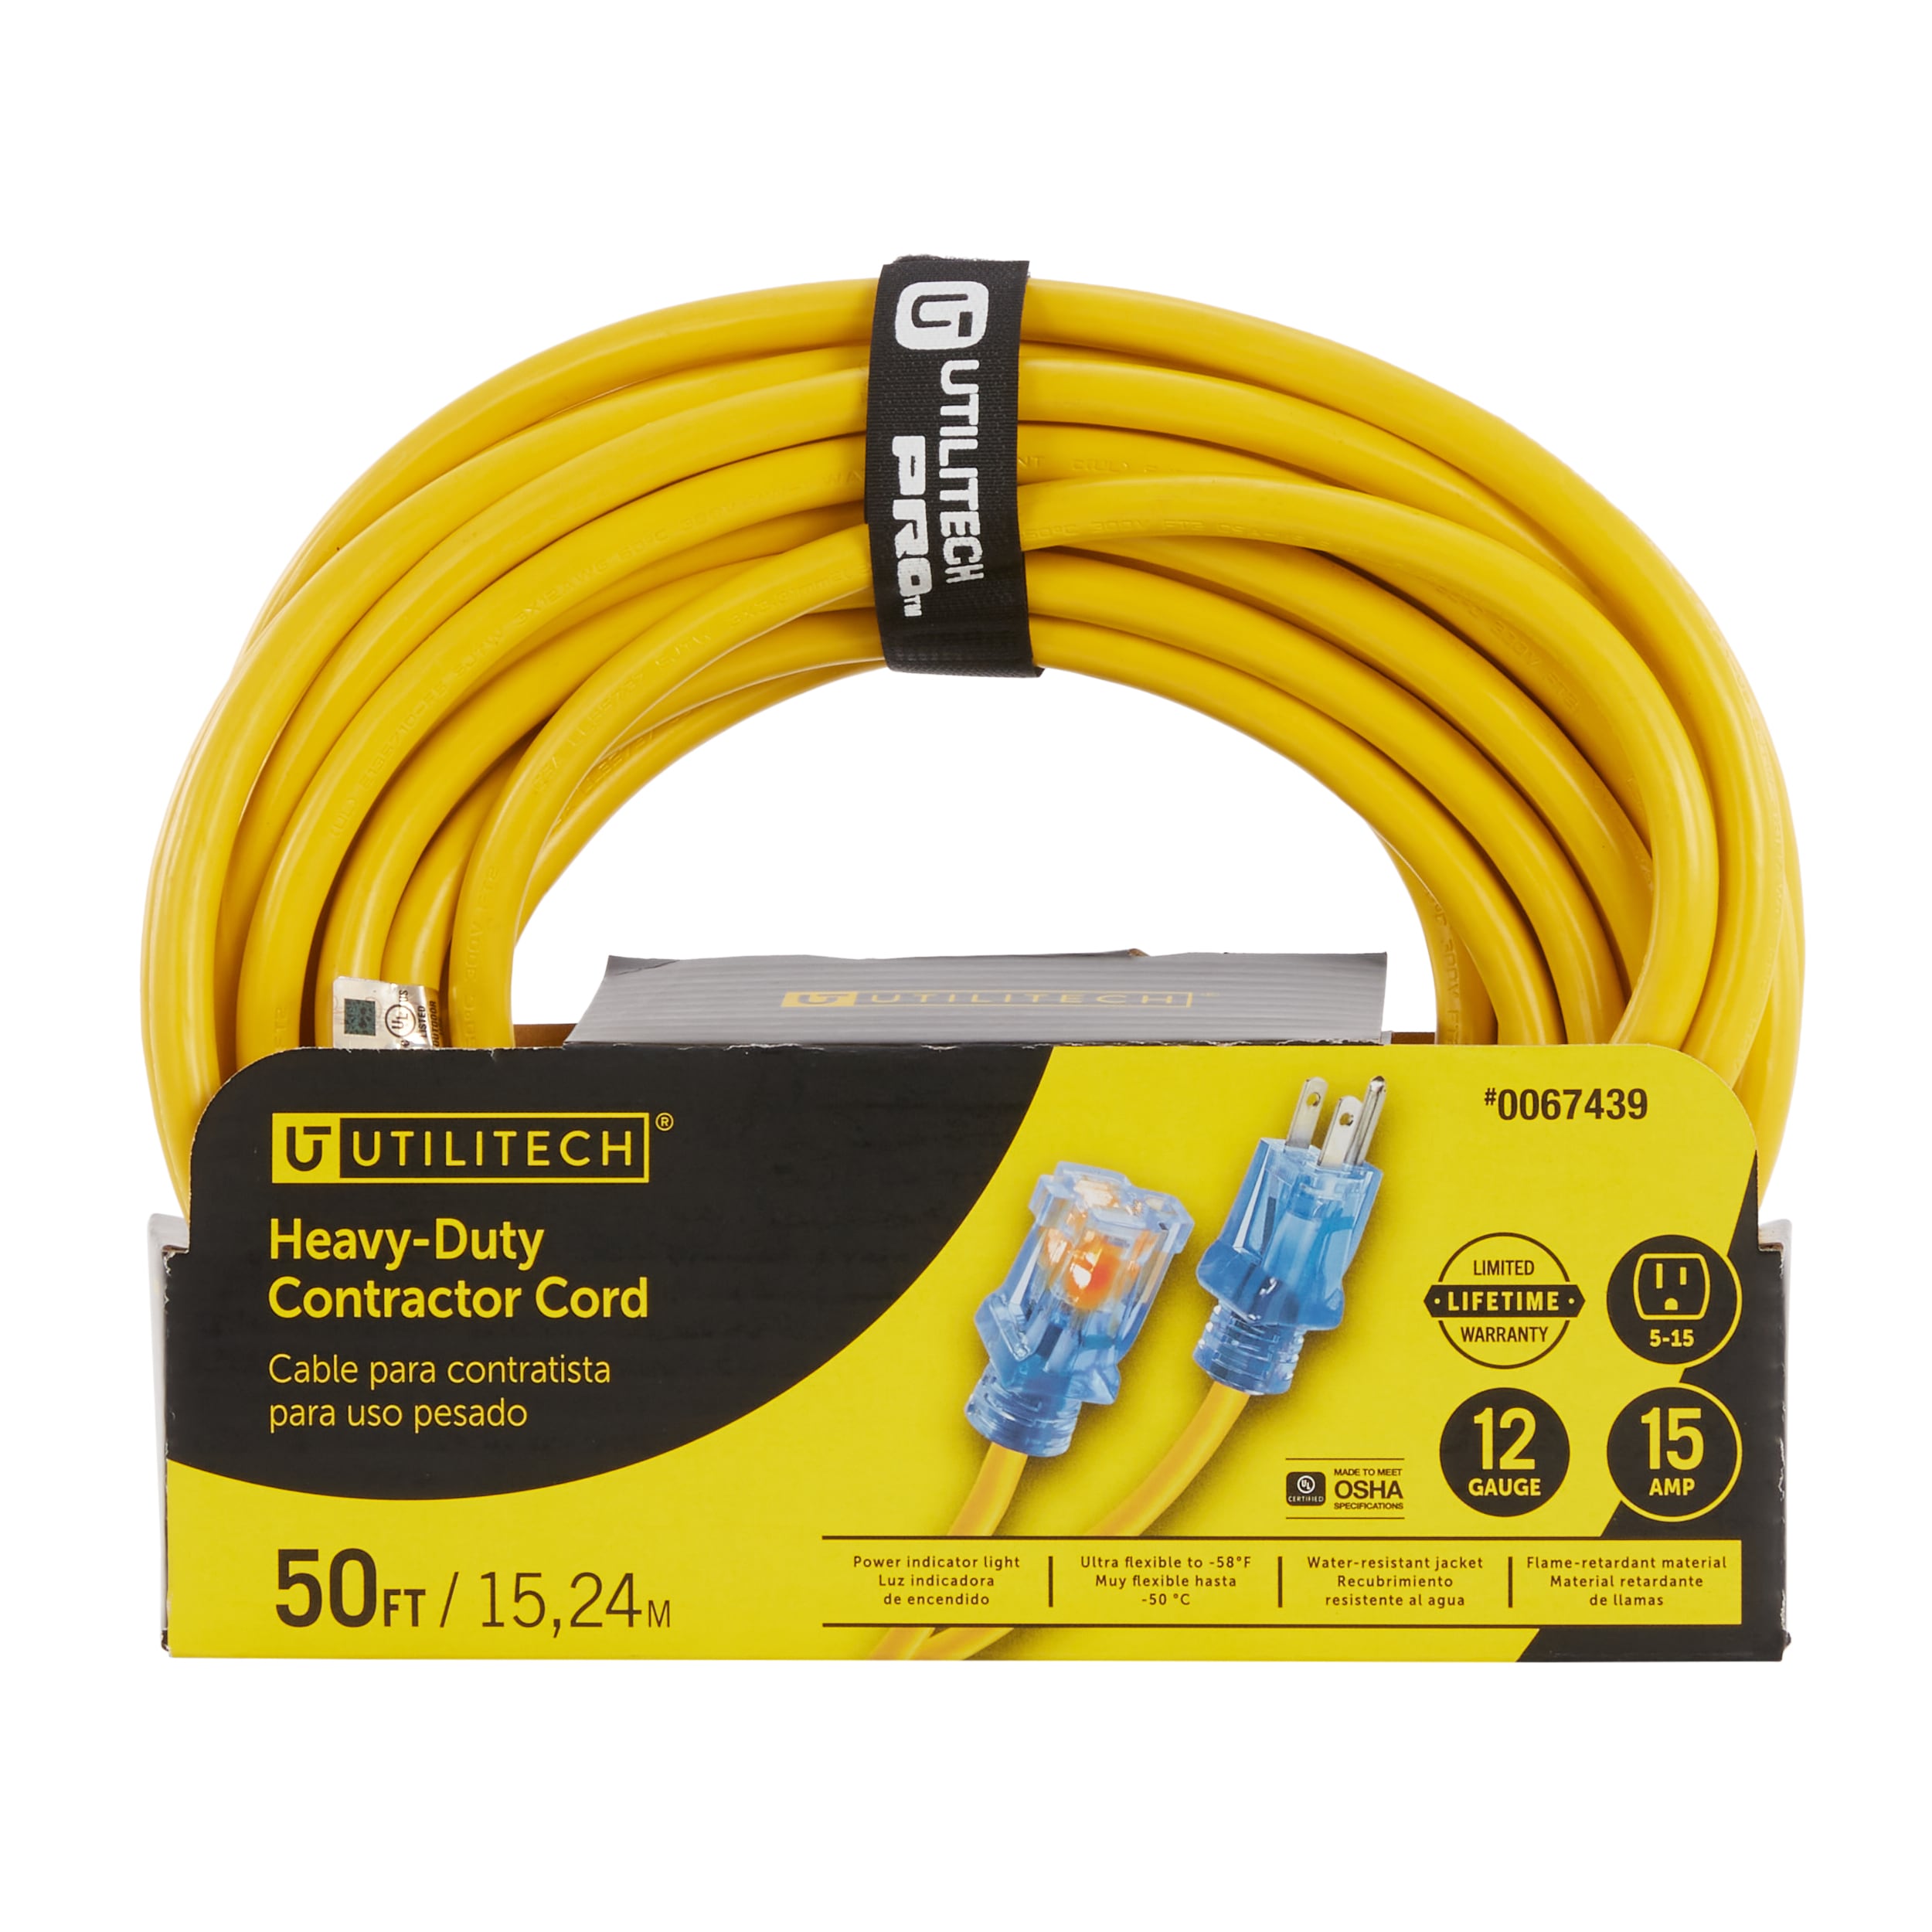 914087 Power First 50 ft. Indoor, Outdoor Lighted Extension Cord; Max Amps:  15.0, Number of Outlets: 1, Yellow with Bla